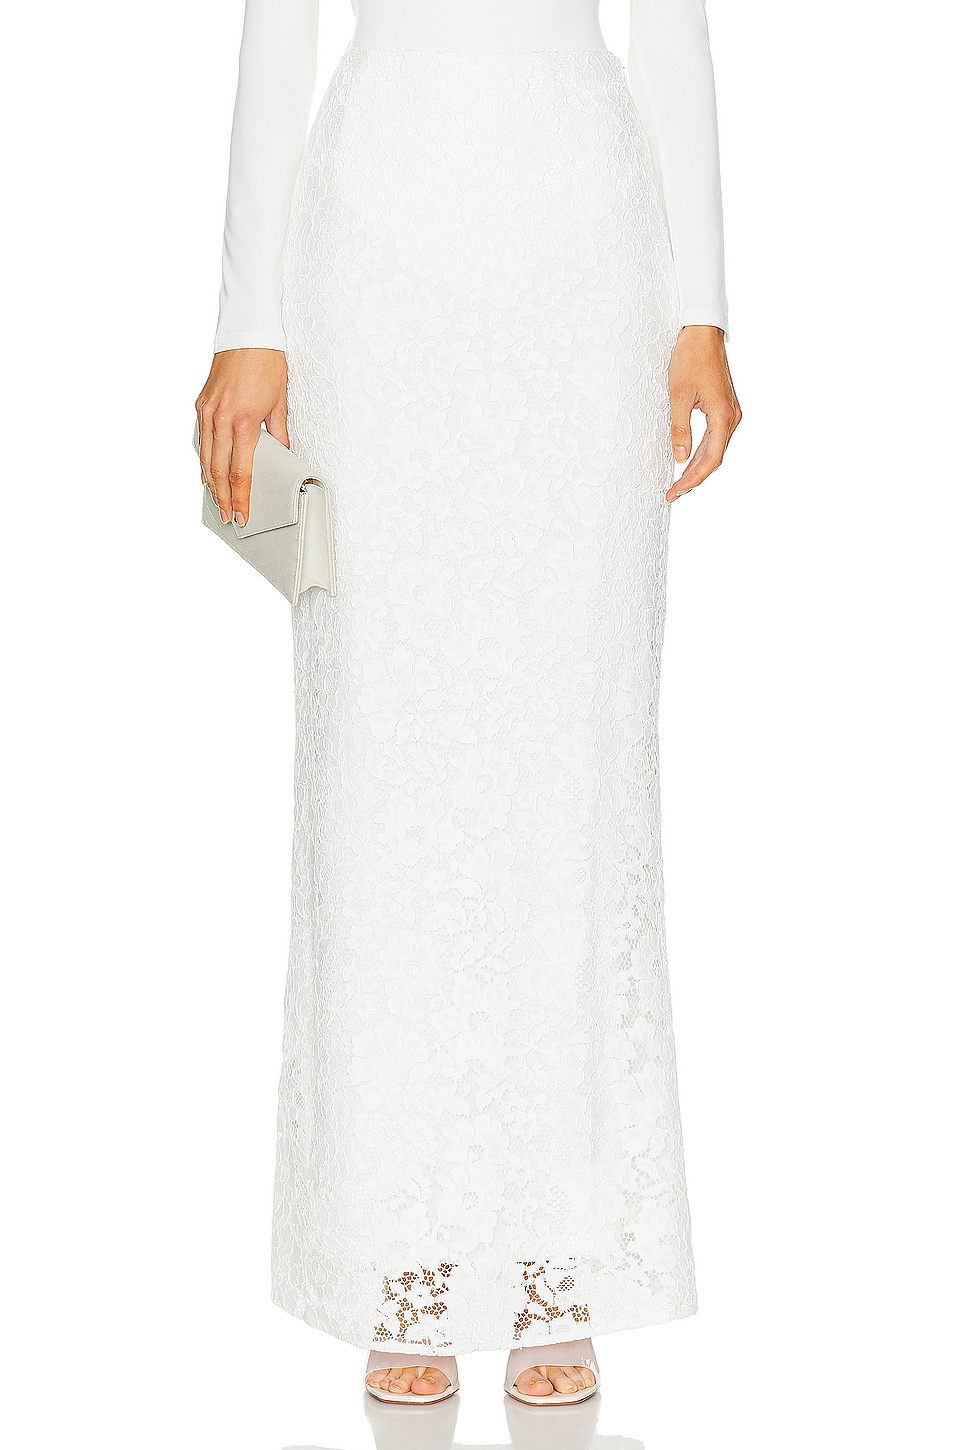 Image 1 of SANS FAFF Florence Maxi Skirt in White